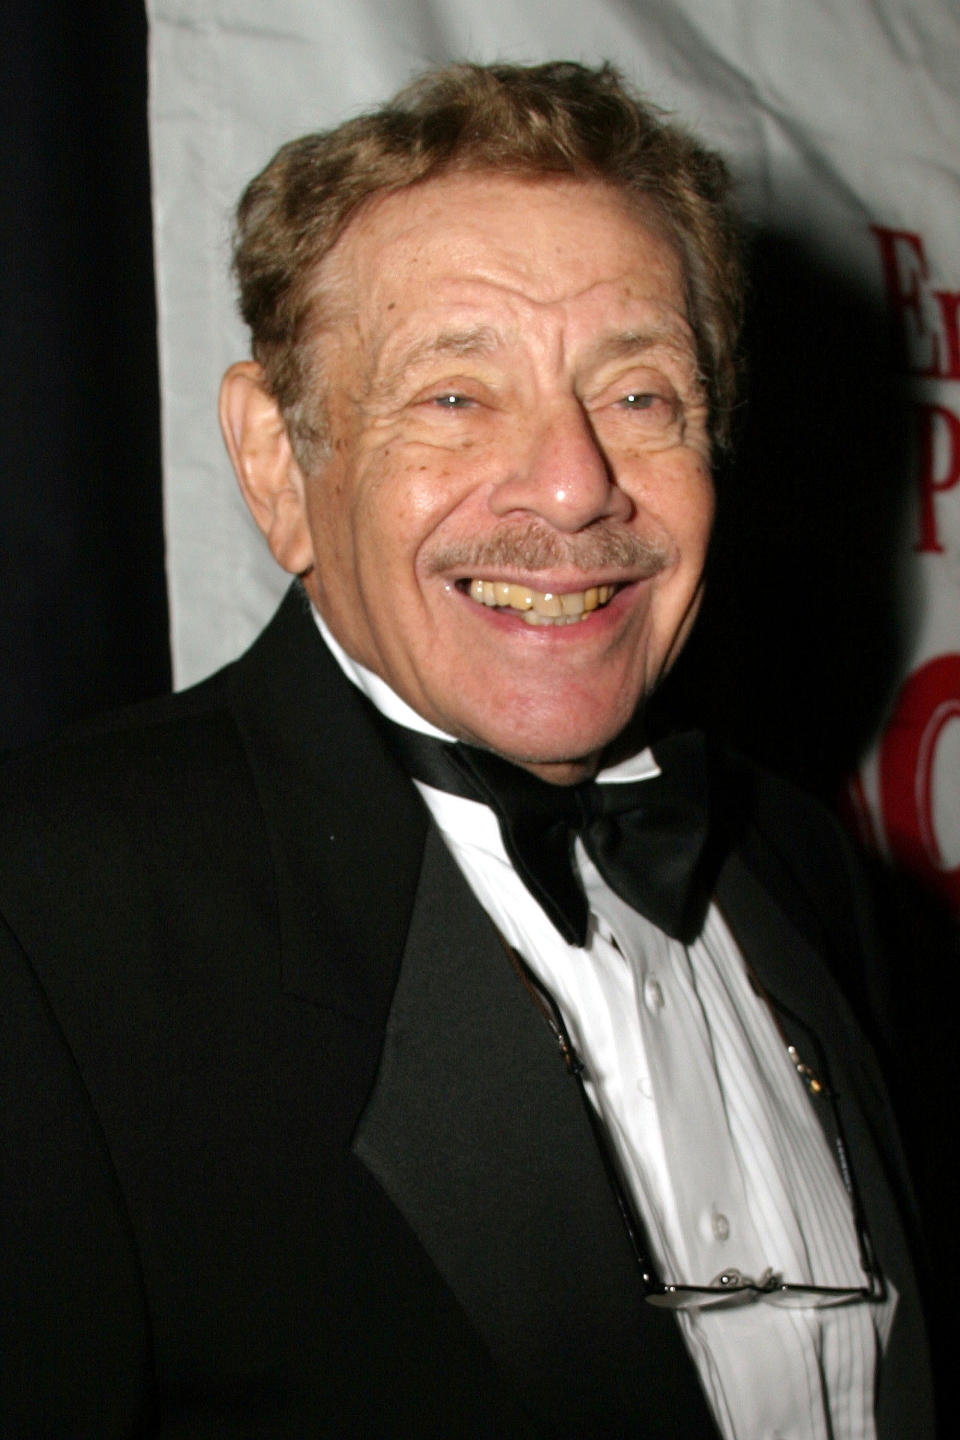 Actor Jerry Stiller arrives at the Actor's Fund Annual Gala Dinner and Tribute on Nov. 17, 2003, at Cipriani's Restaurant in New York City. (Photo by Sara Jaye/Getty Images)